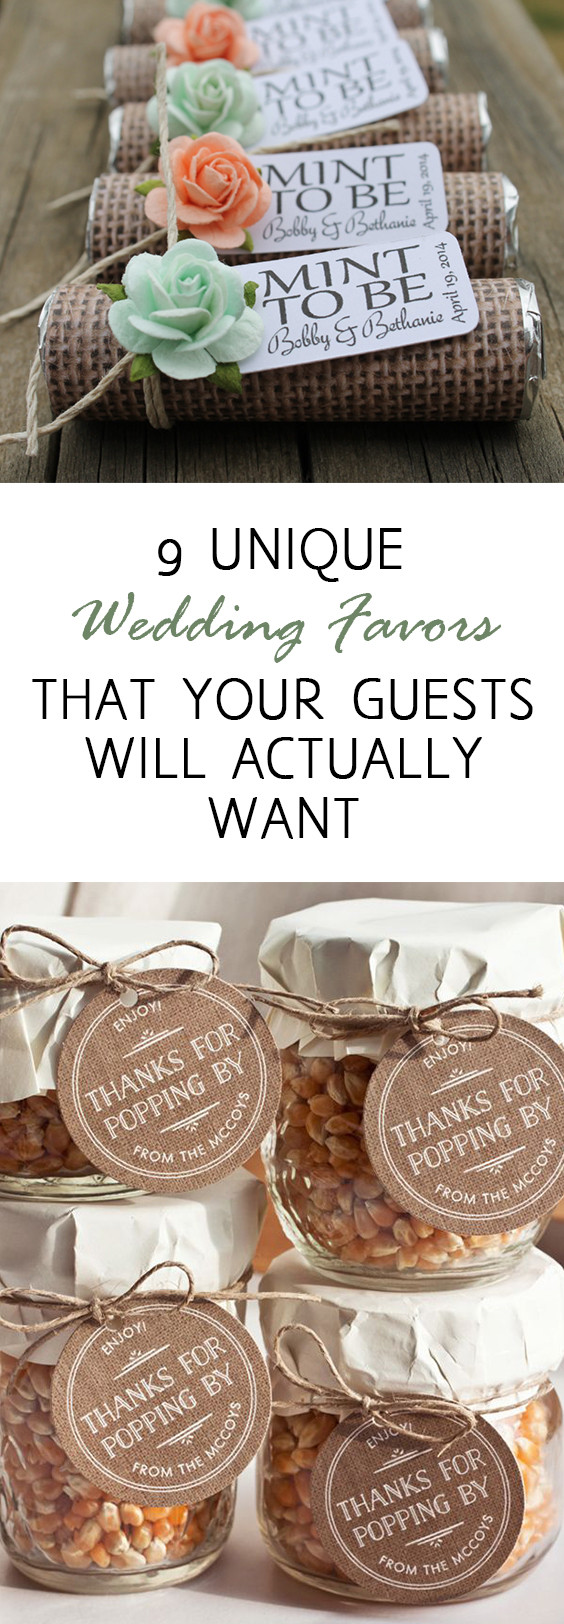 Inexpensive Wedding Favor Ideas
 9 Unique Wedding Favors that Your Guests Will Actually